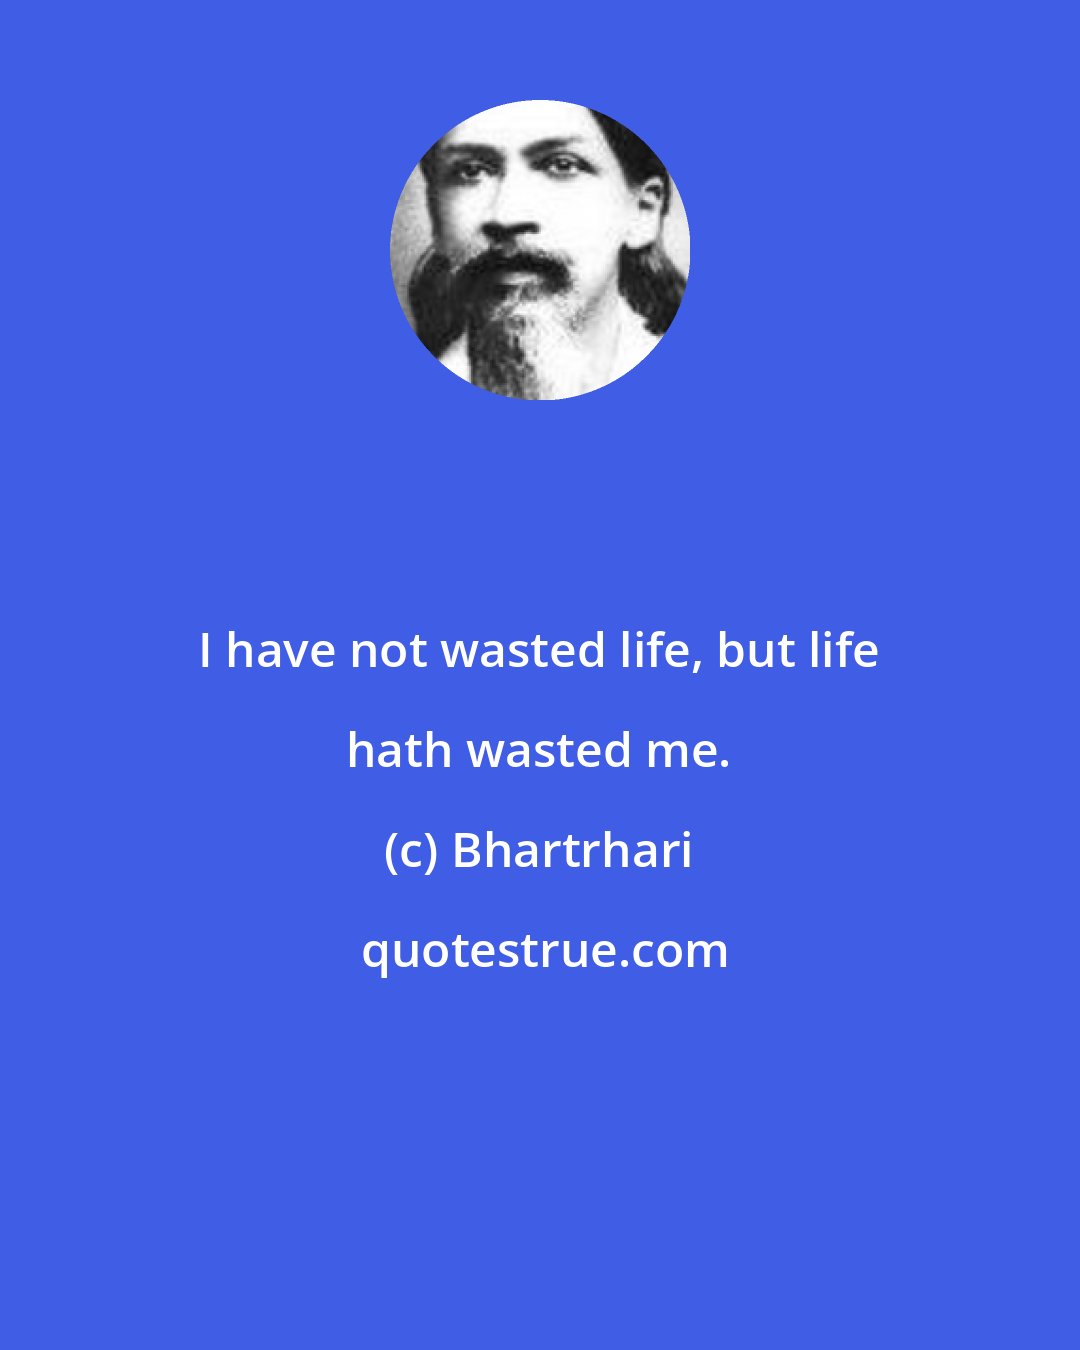 Bhartrhari: I have not wasted life, but life hath wasted me.